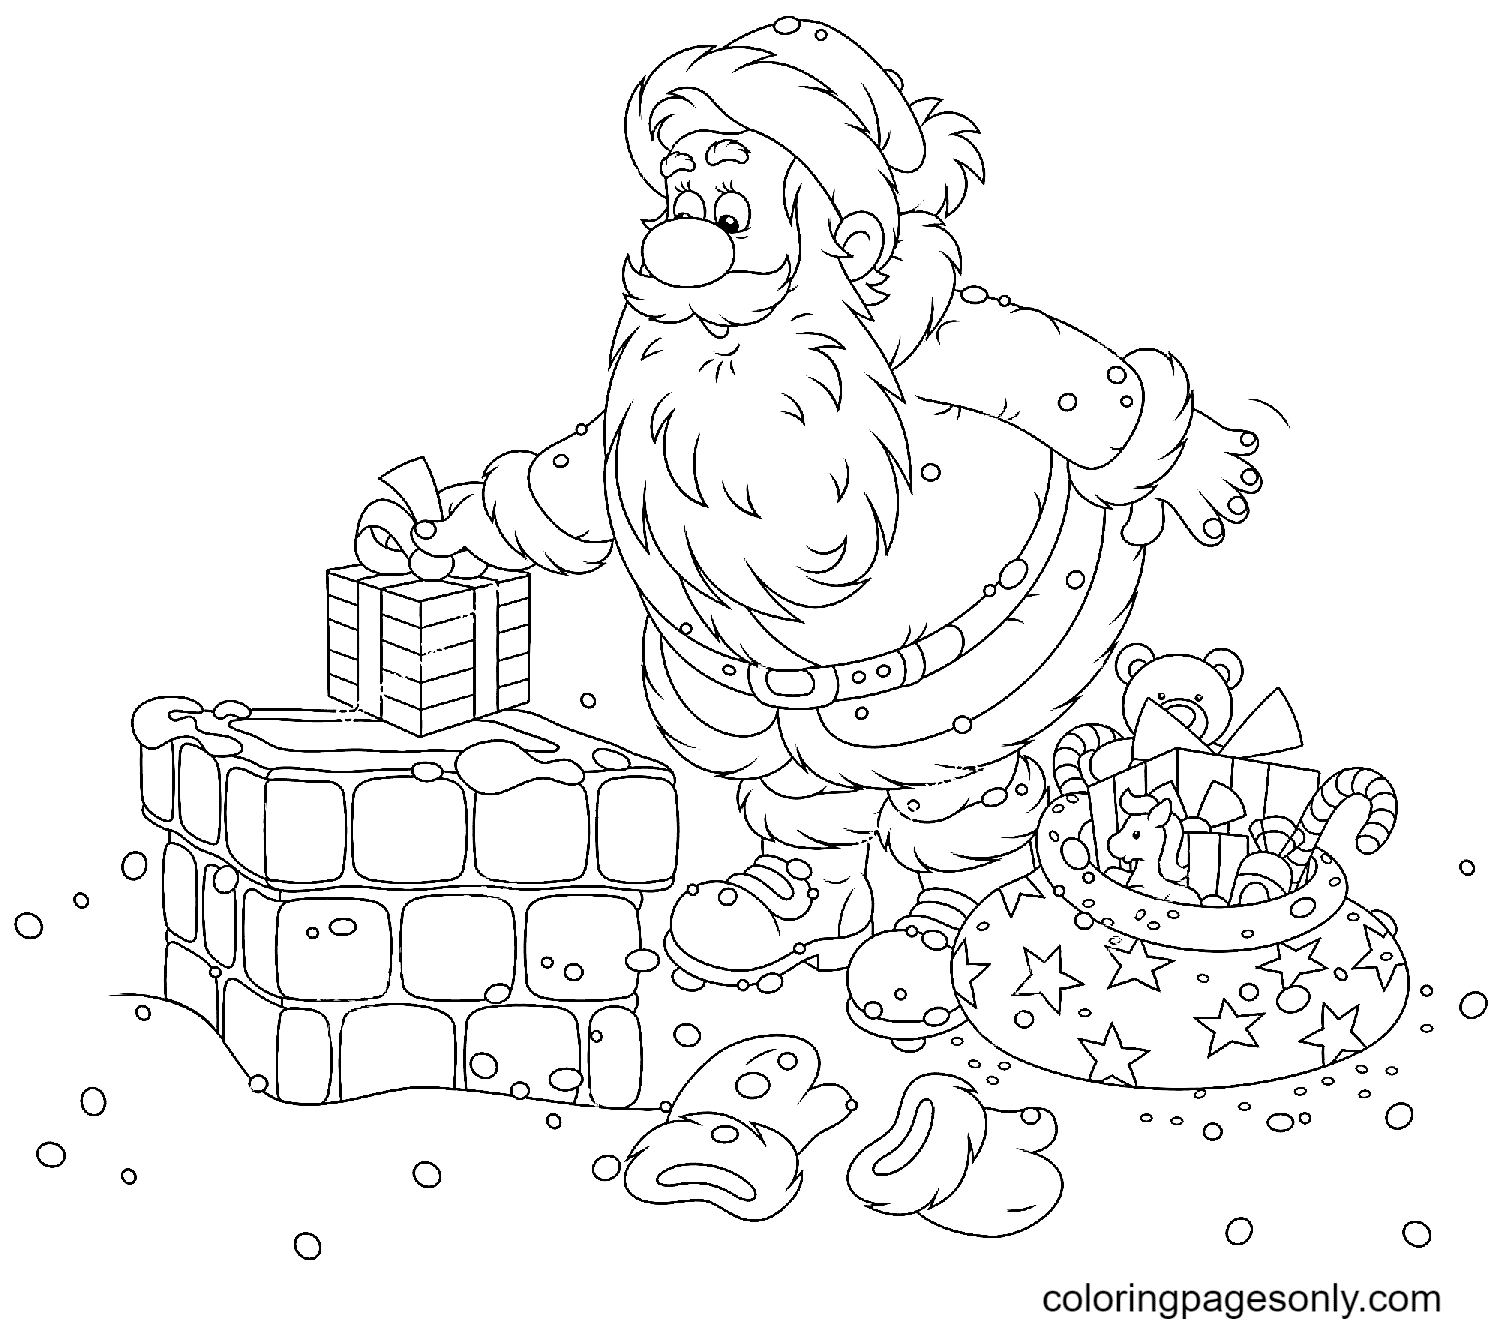 Santa Claus with Christmas Gifts on A Hhousetop Coloring Pages